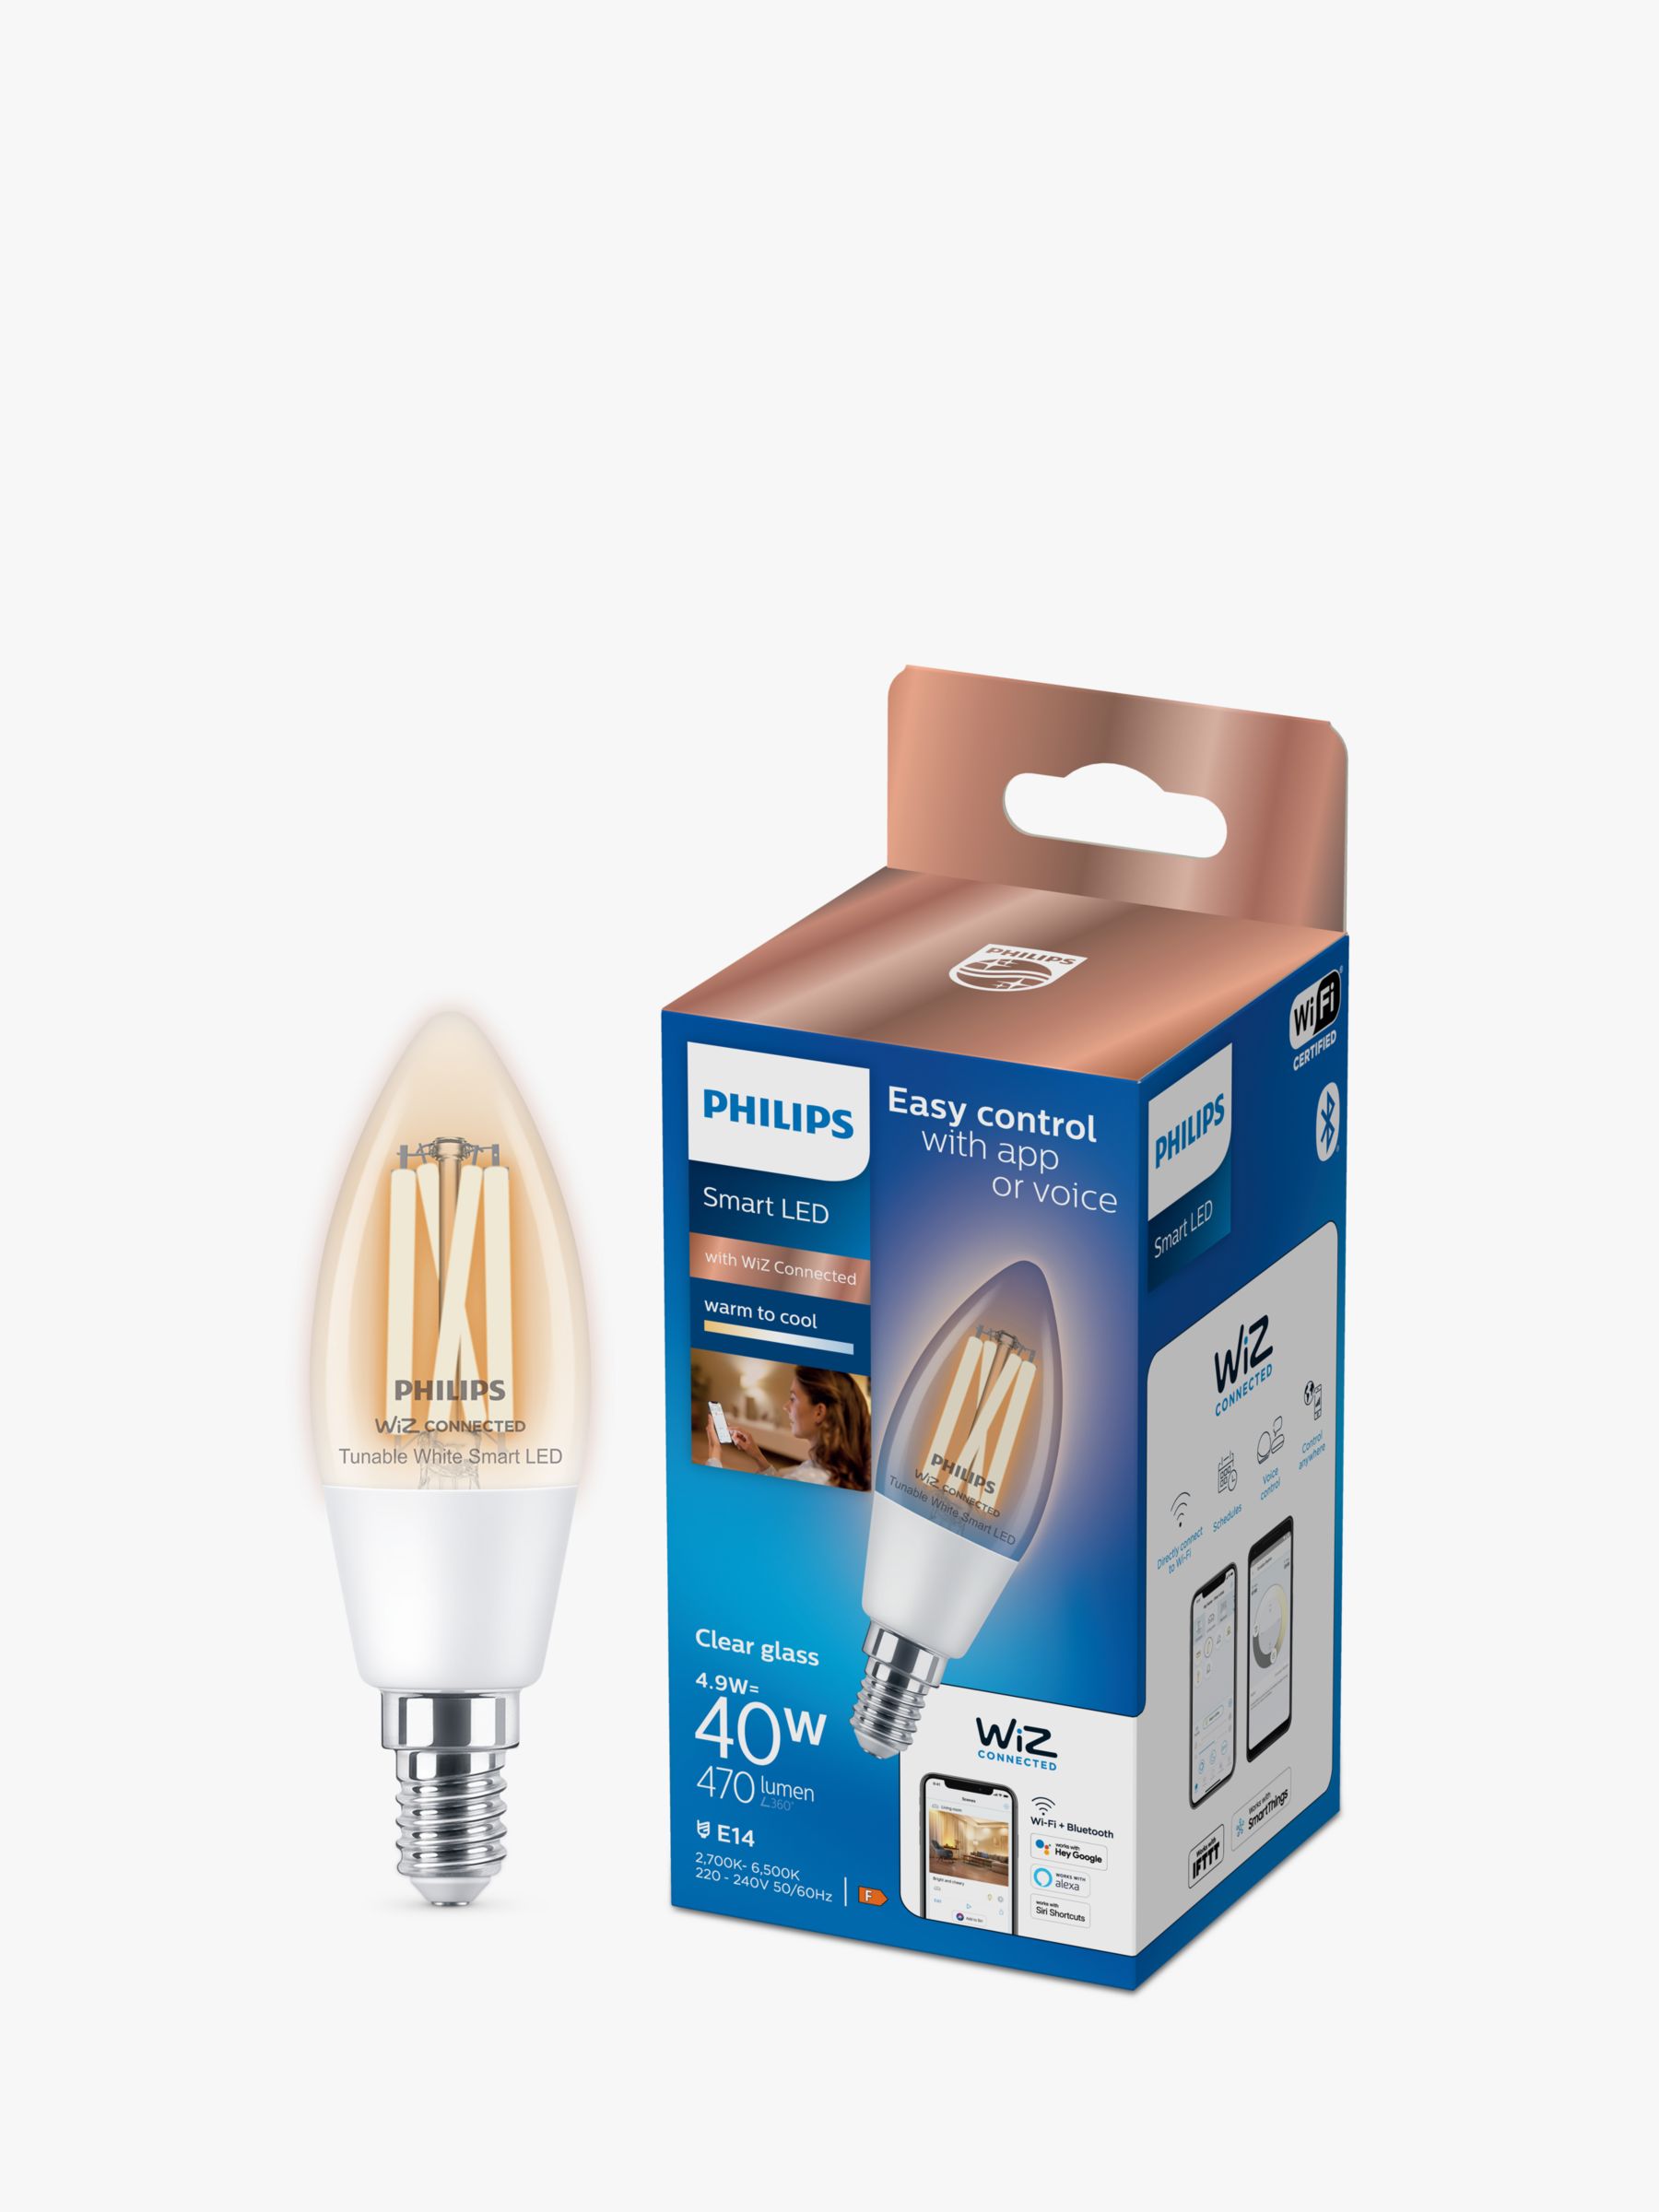 Photo of Philips smart led 5w e14 dimmable warm-to-cool candle bulb with wiz connected and bluetooth clear